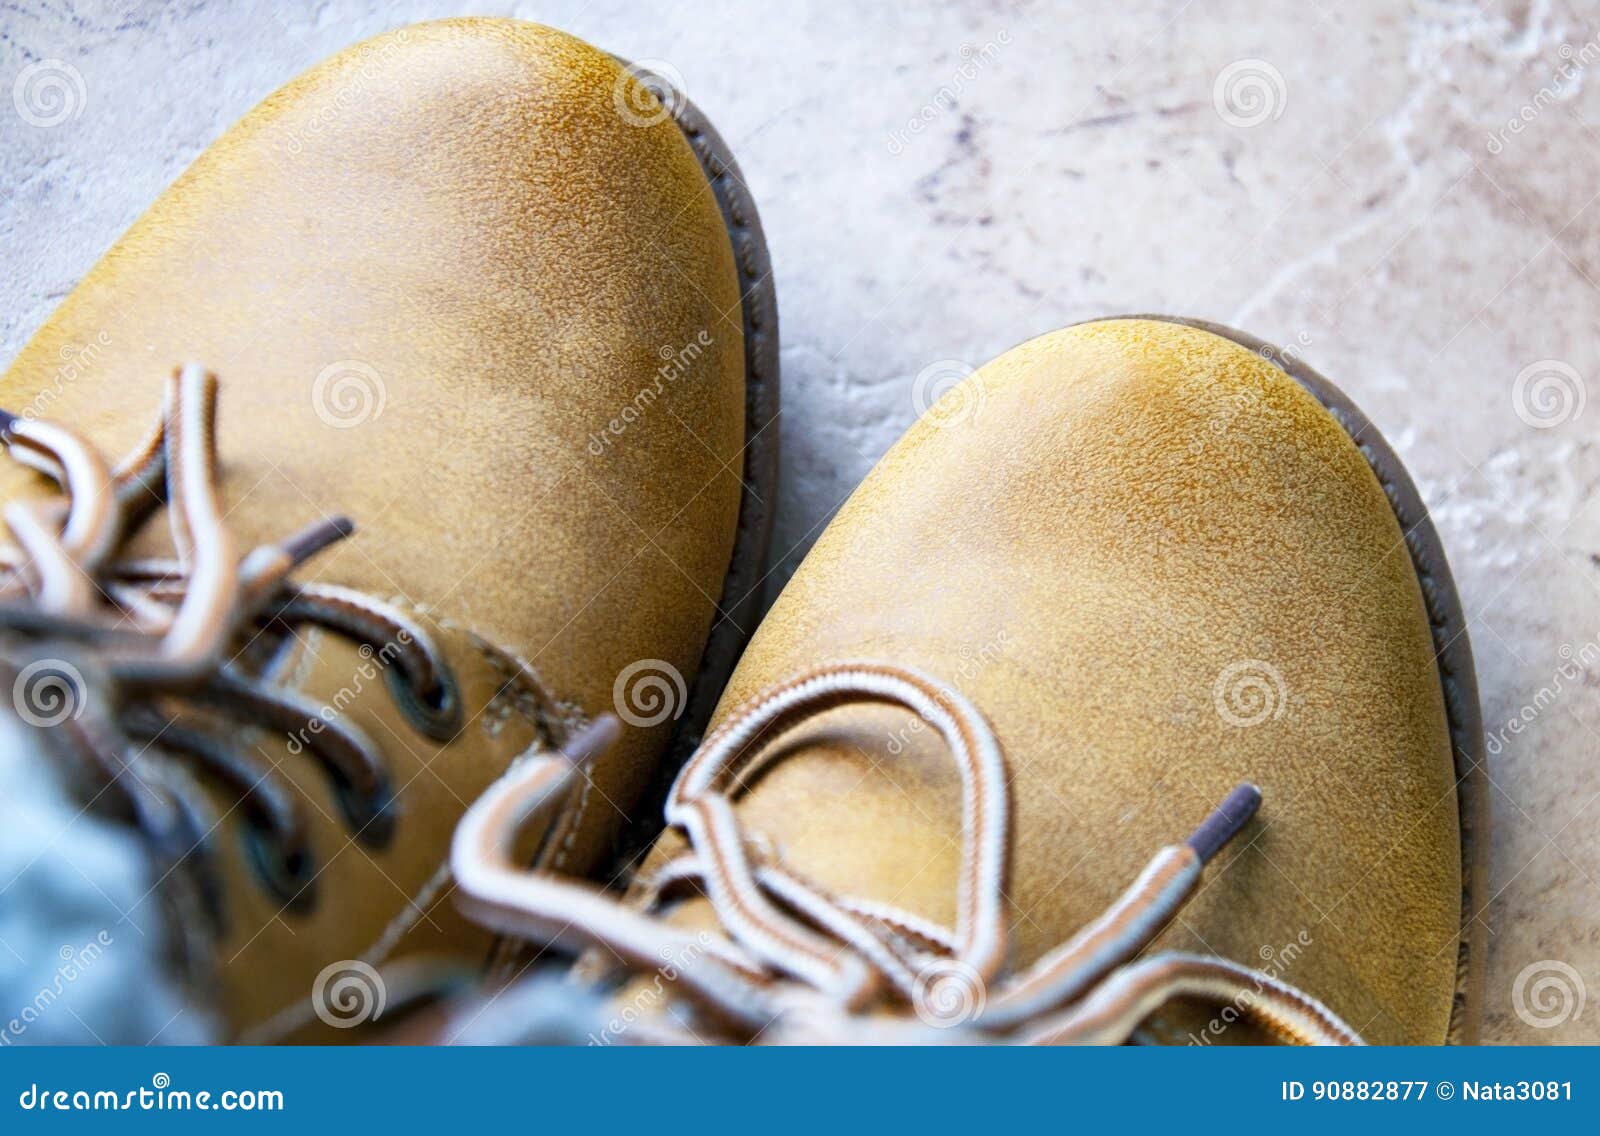 Brown leather boot stock image. Image of pair, heavy - 90882877